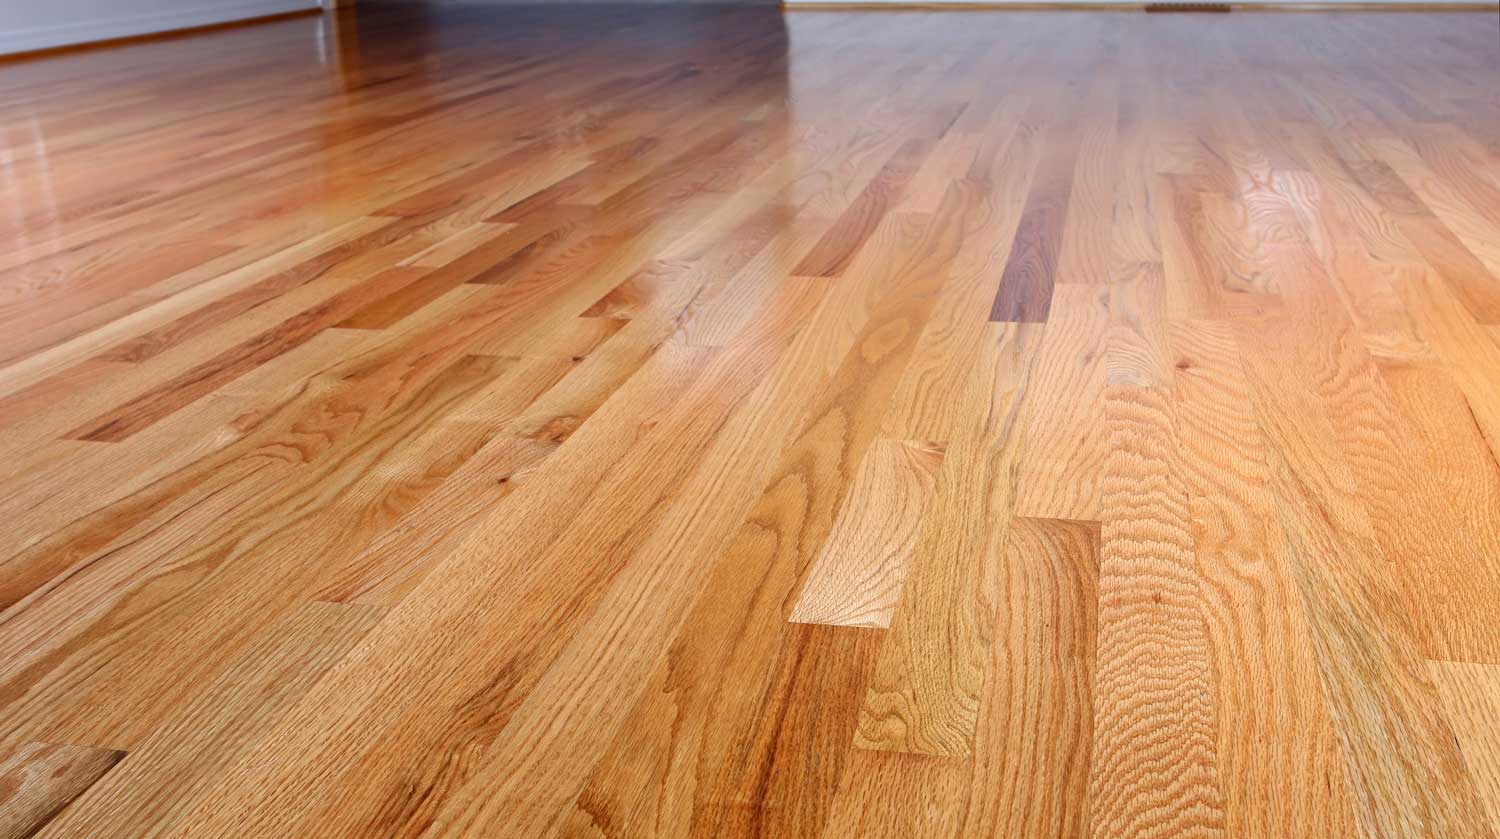 Cost To Refinish A Hardwood Floor, How Much Does It Cost To Redo Hardwood Floors